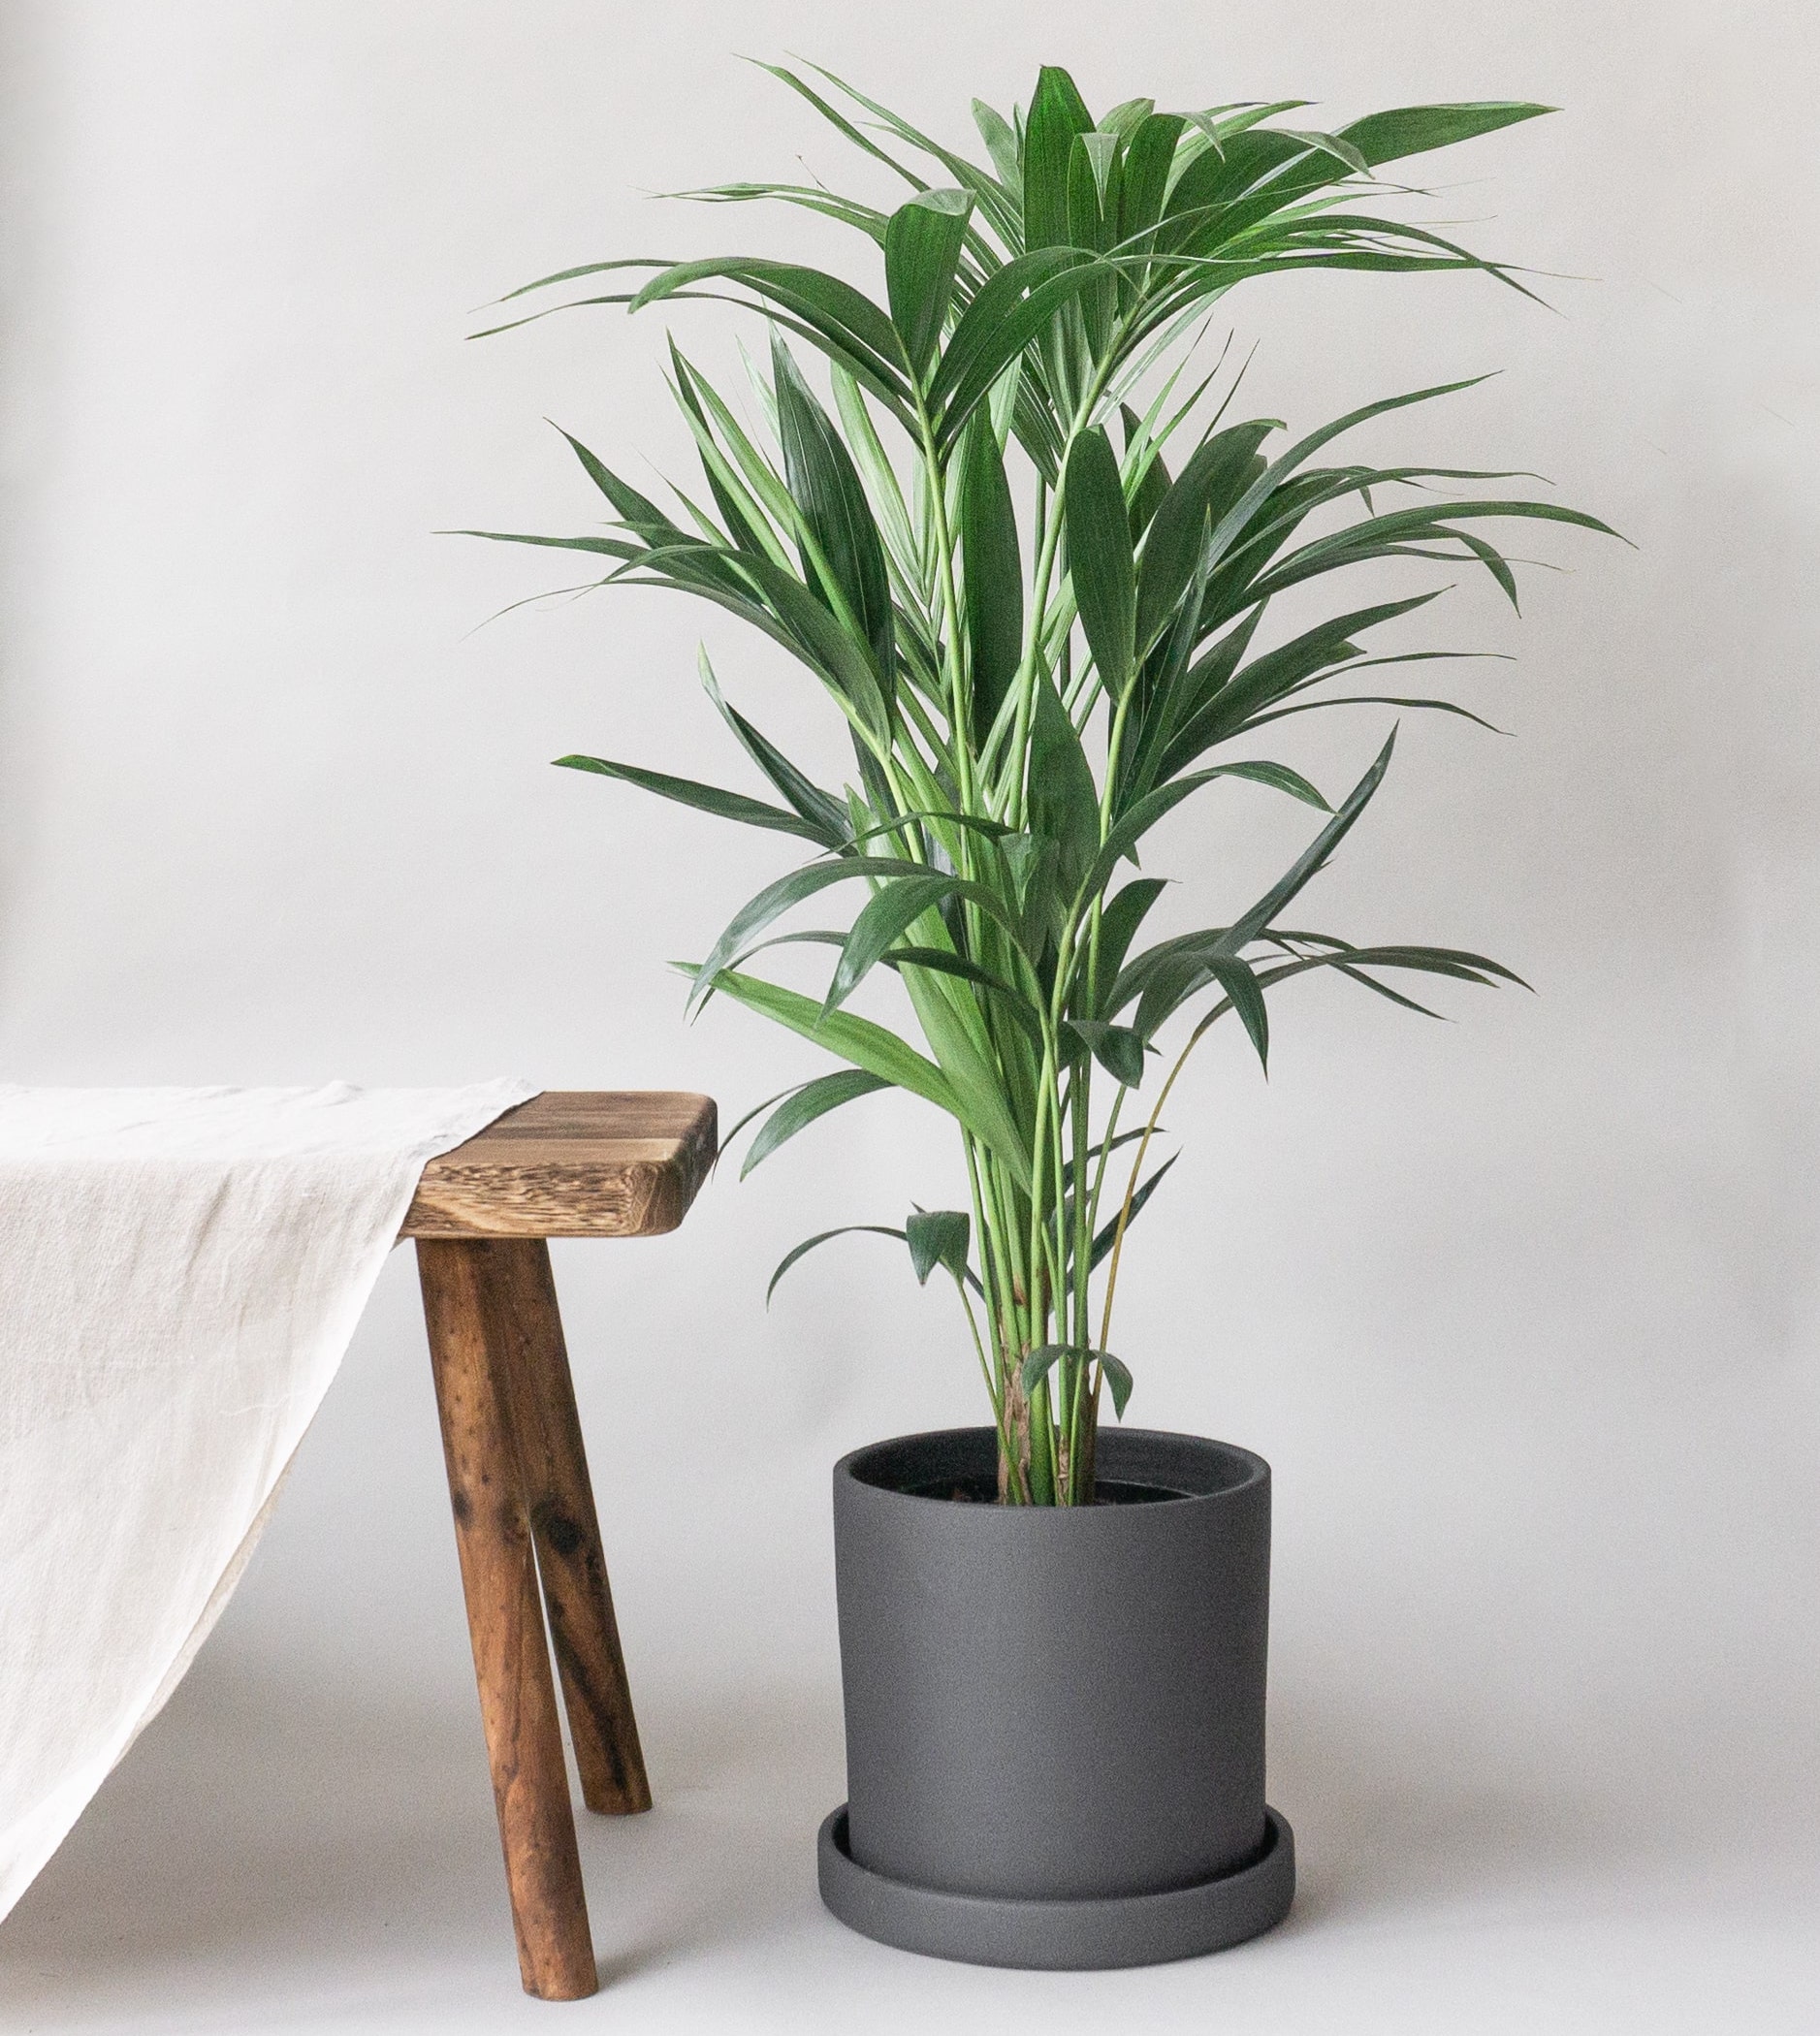 Plant Gifts: 20 Meaningful Plants to to Give as Gifts